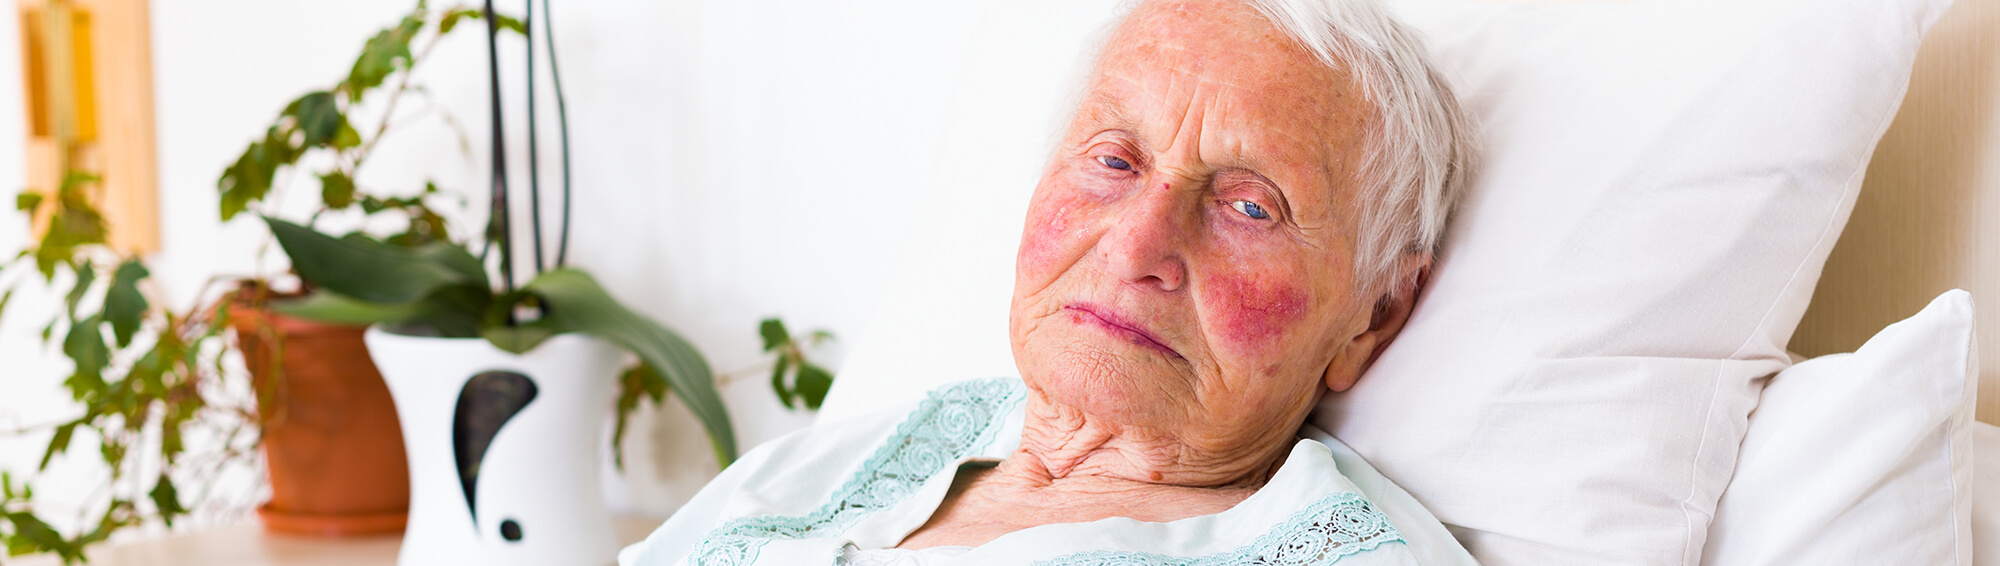 Call a Lawyer Right Away if You Suspect Nursing Home Abuse